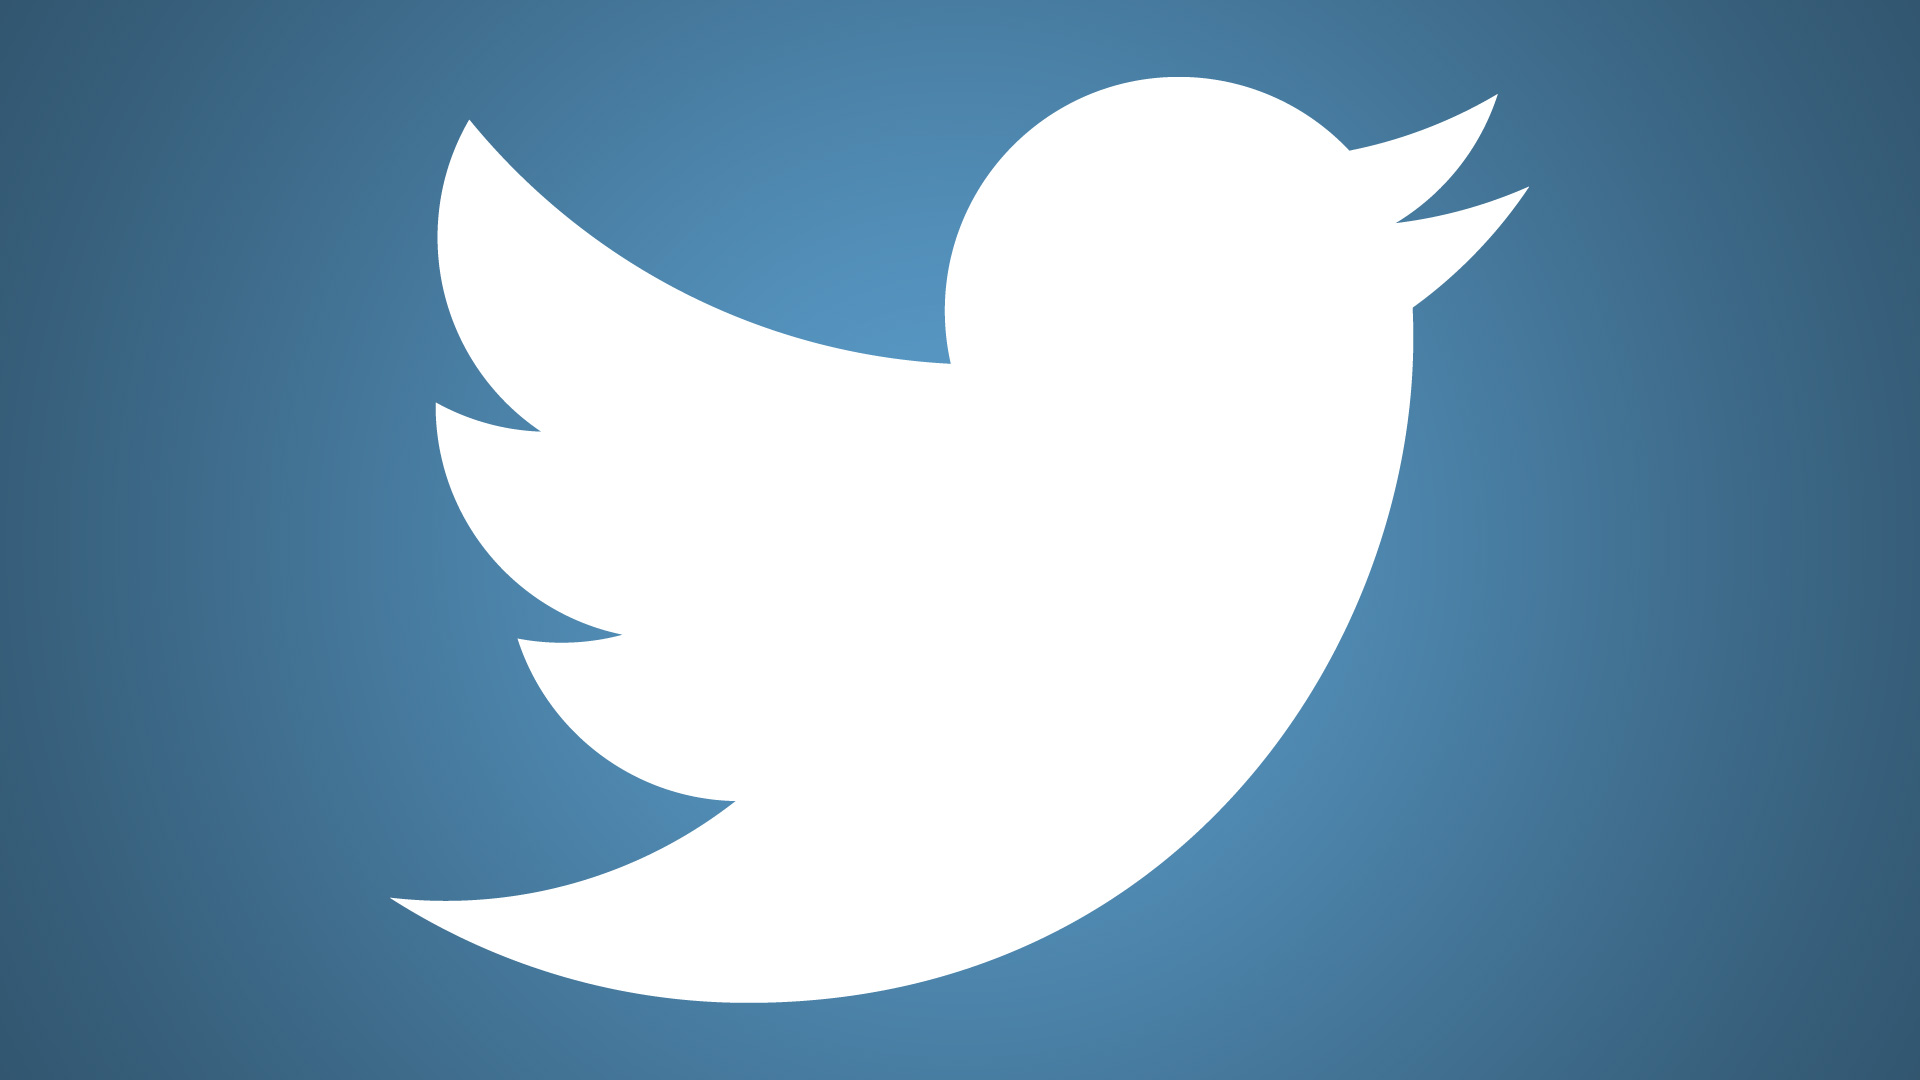 Respondology extends its brand protection to Twitter